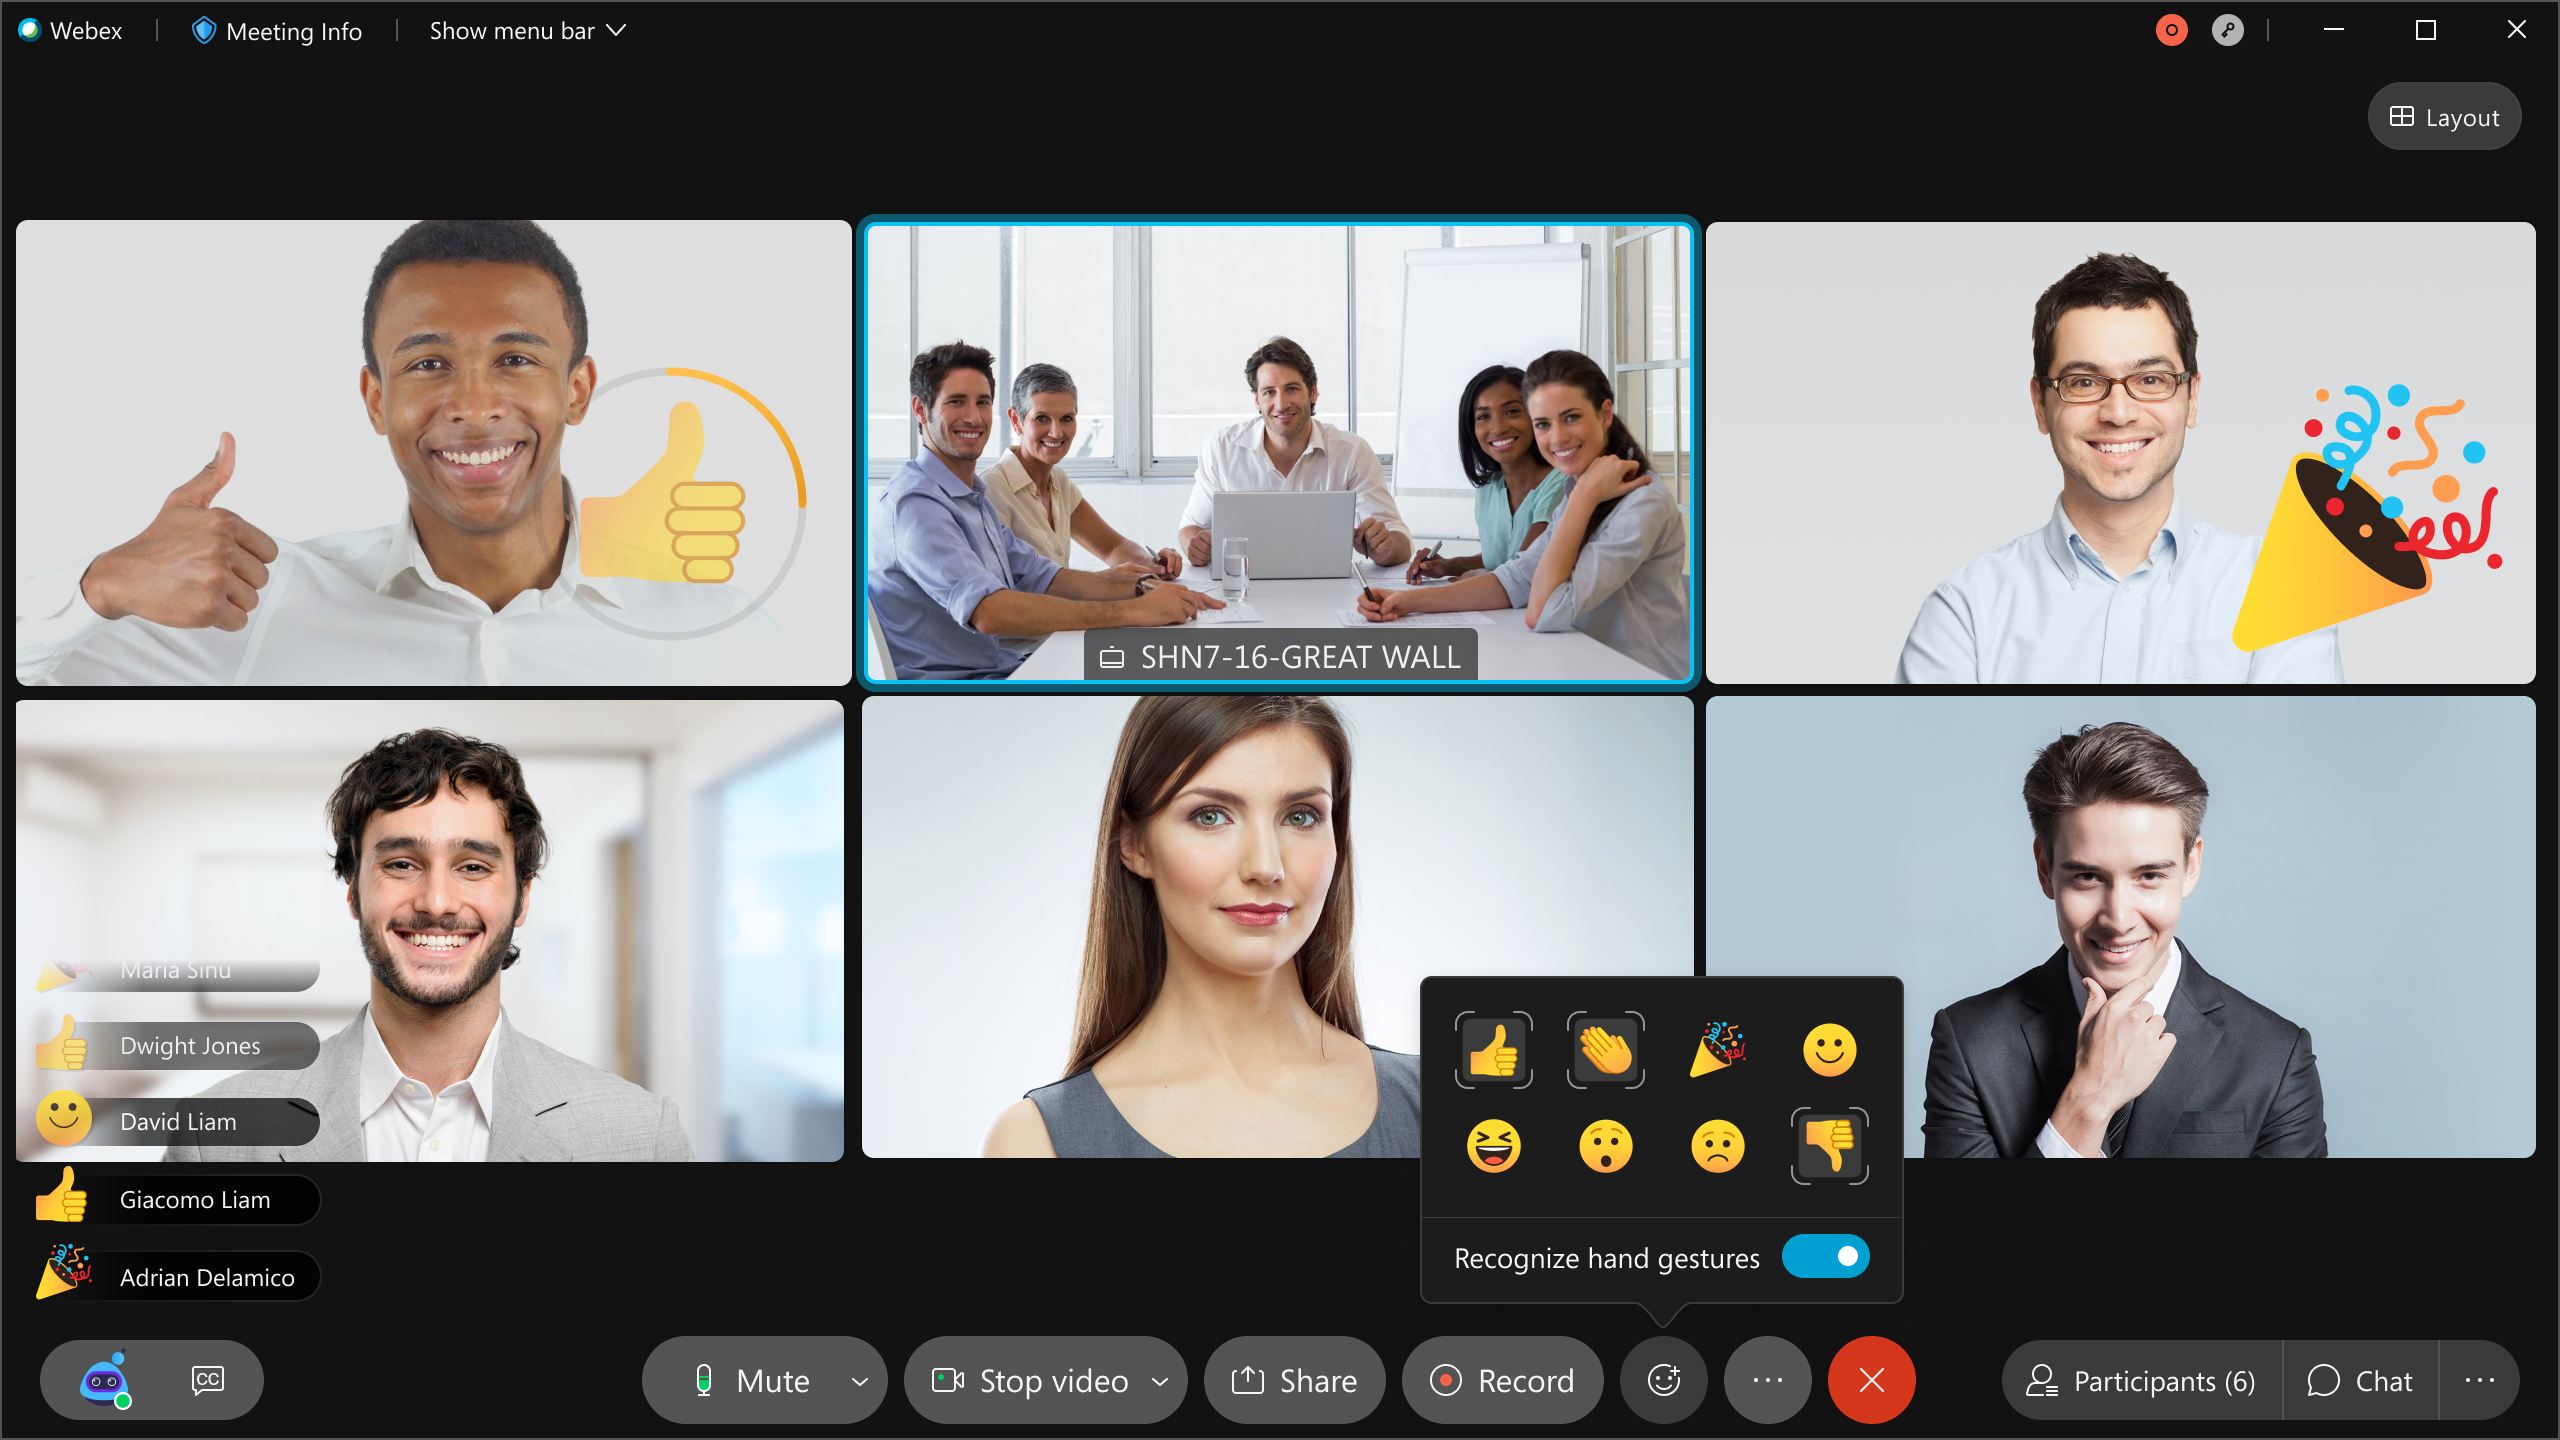 What’s so NEW about the All New Webex?